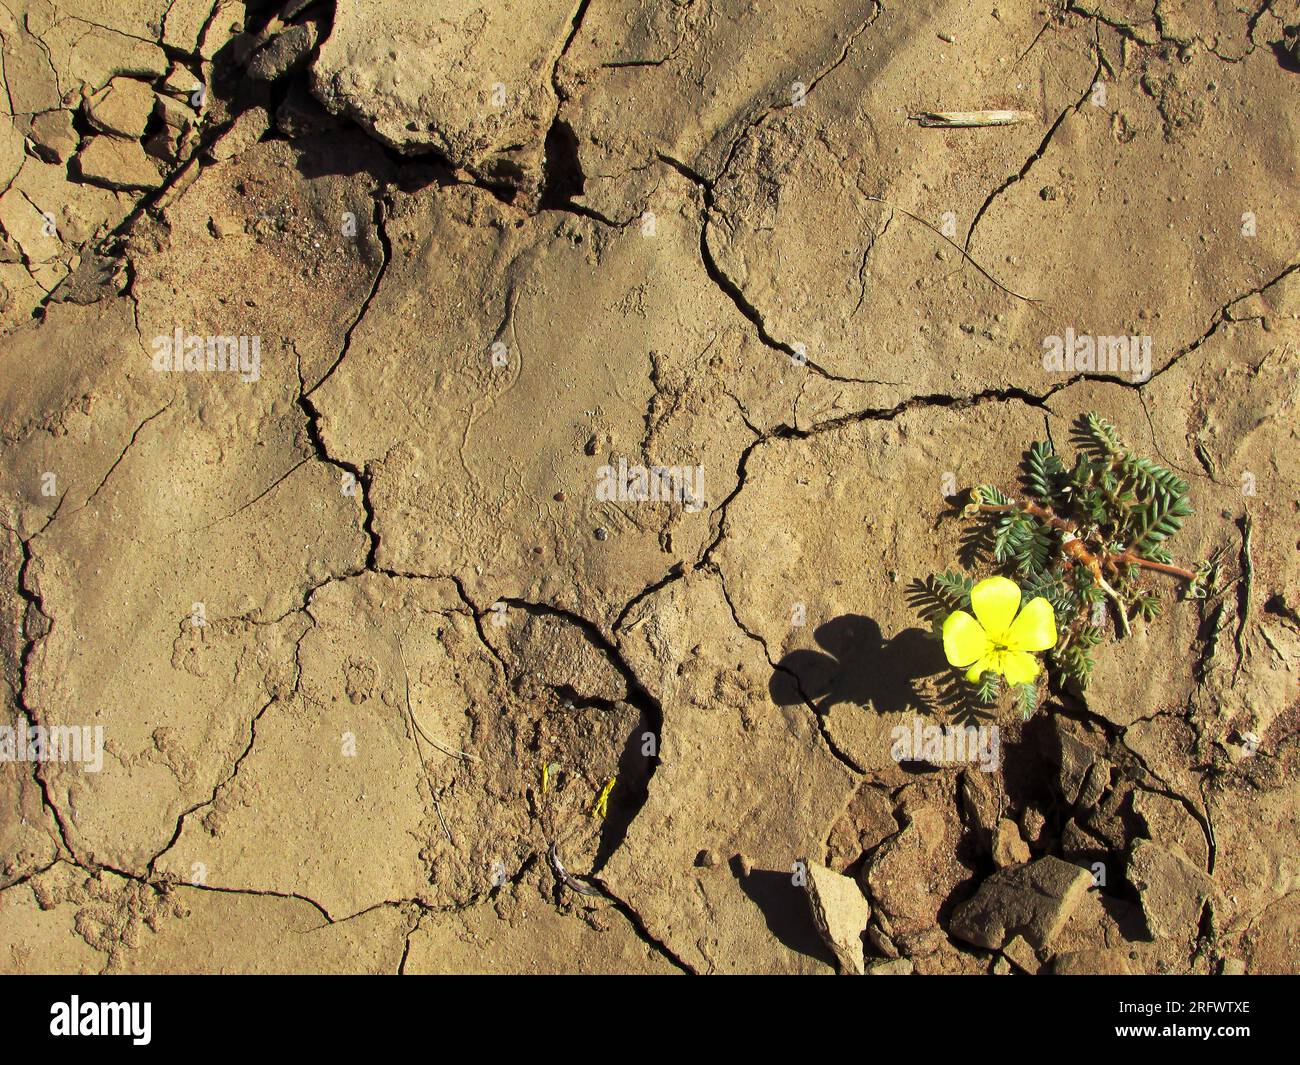 Single flower of a devils thorn on the dried up cracked ground in Southern Namibia. Stock Photo